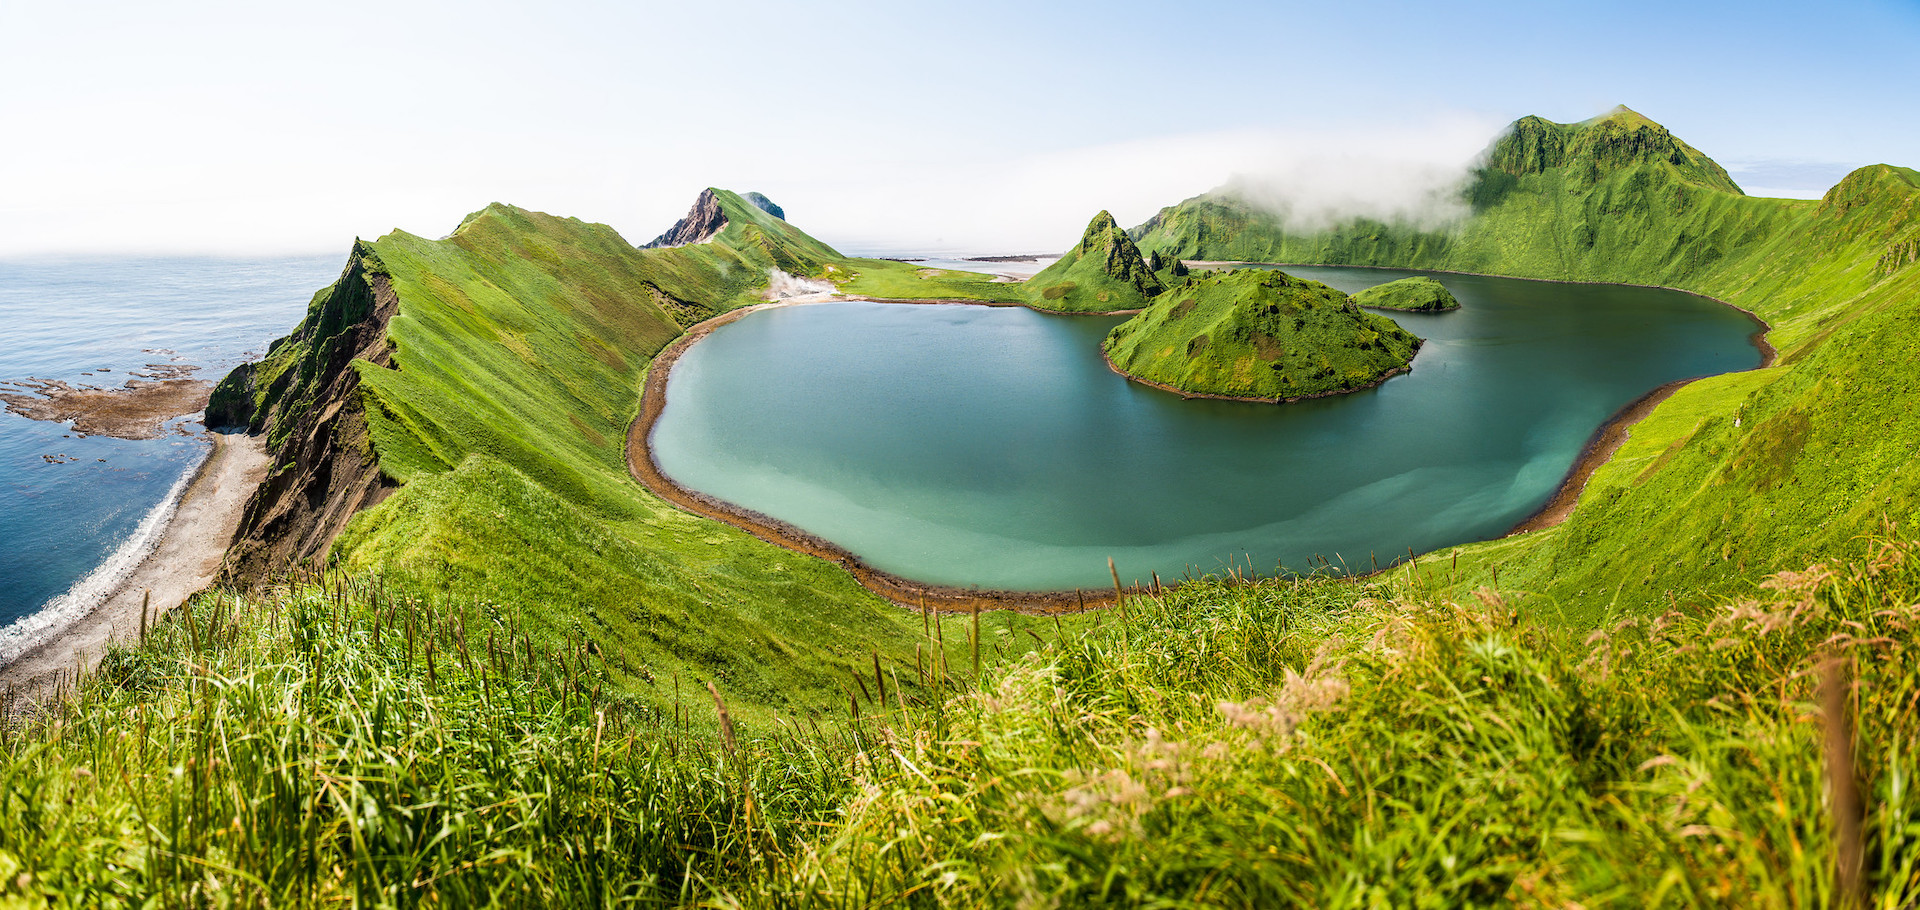 Ushishir, an uninhabited volcanic island located in the centre of the Kuril Islands